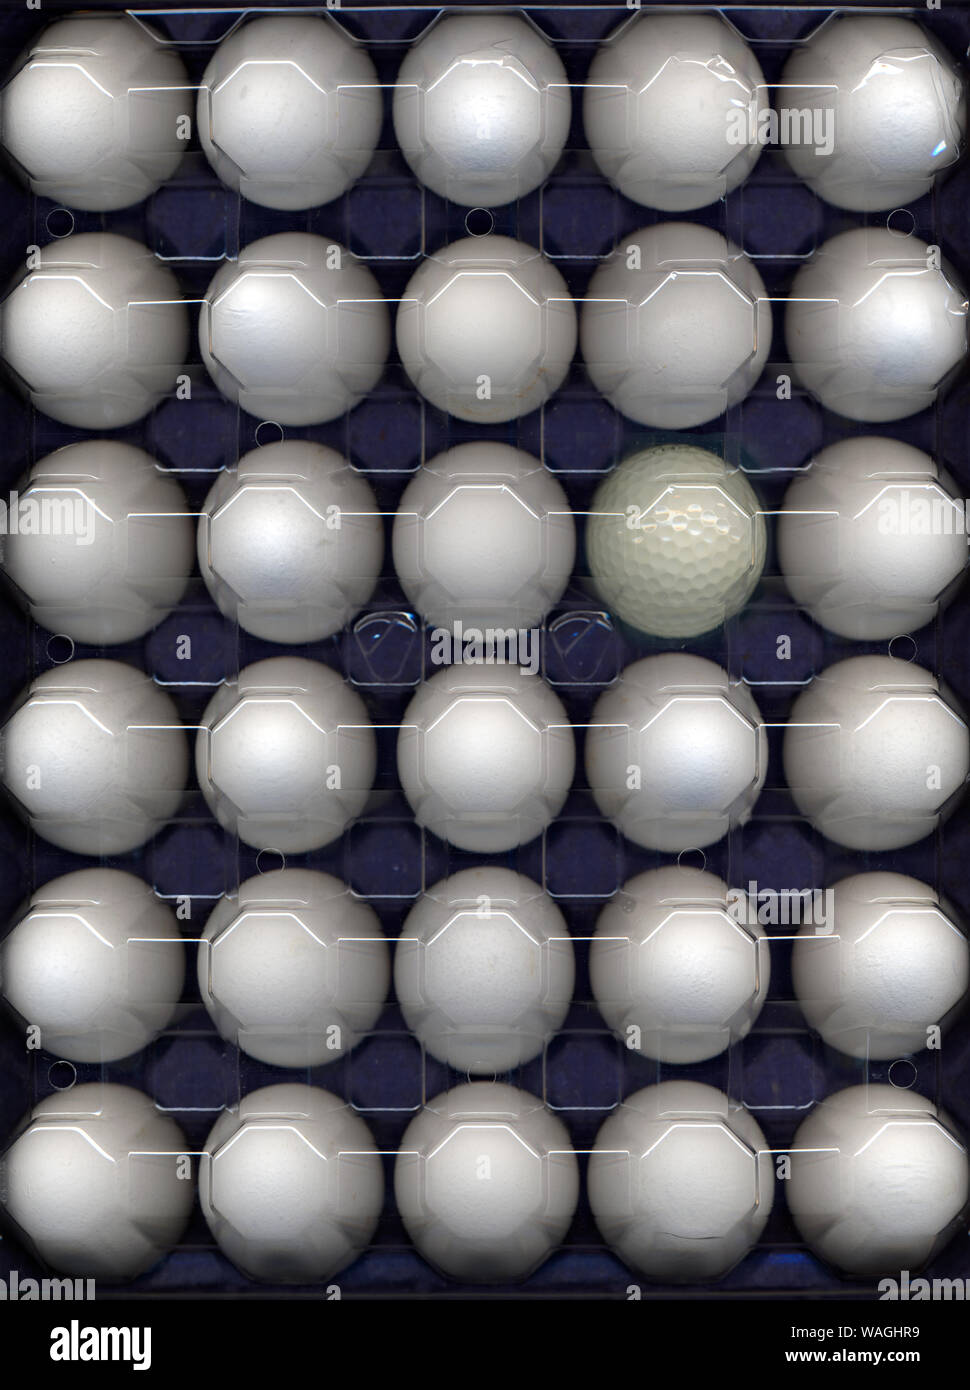 Golf ball concealed in egg crate Stock Photo - Alamy